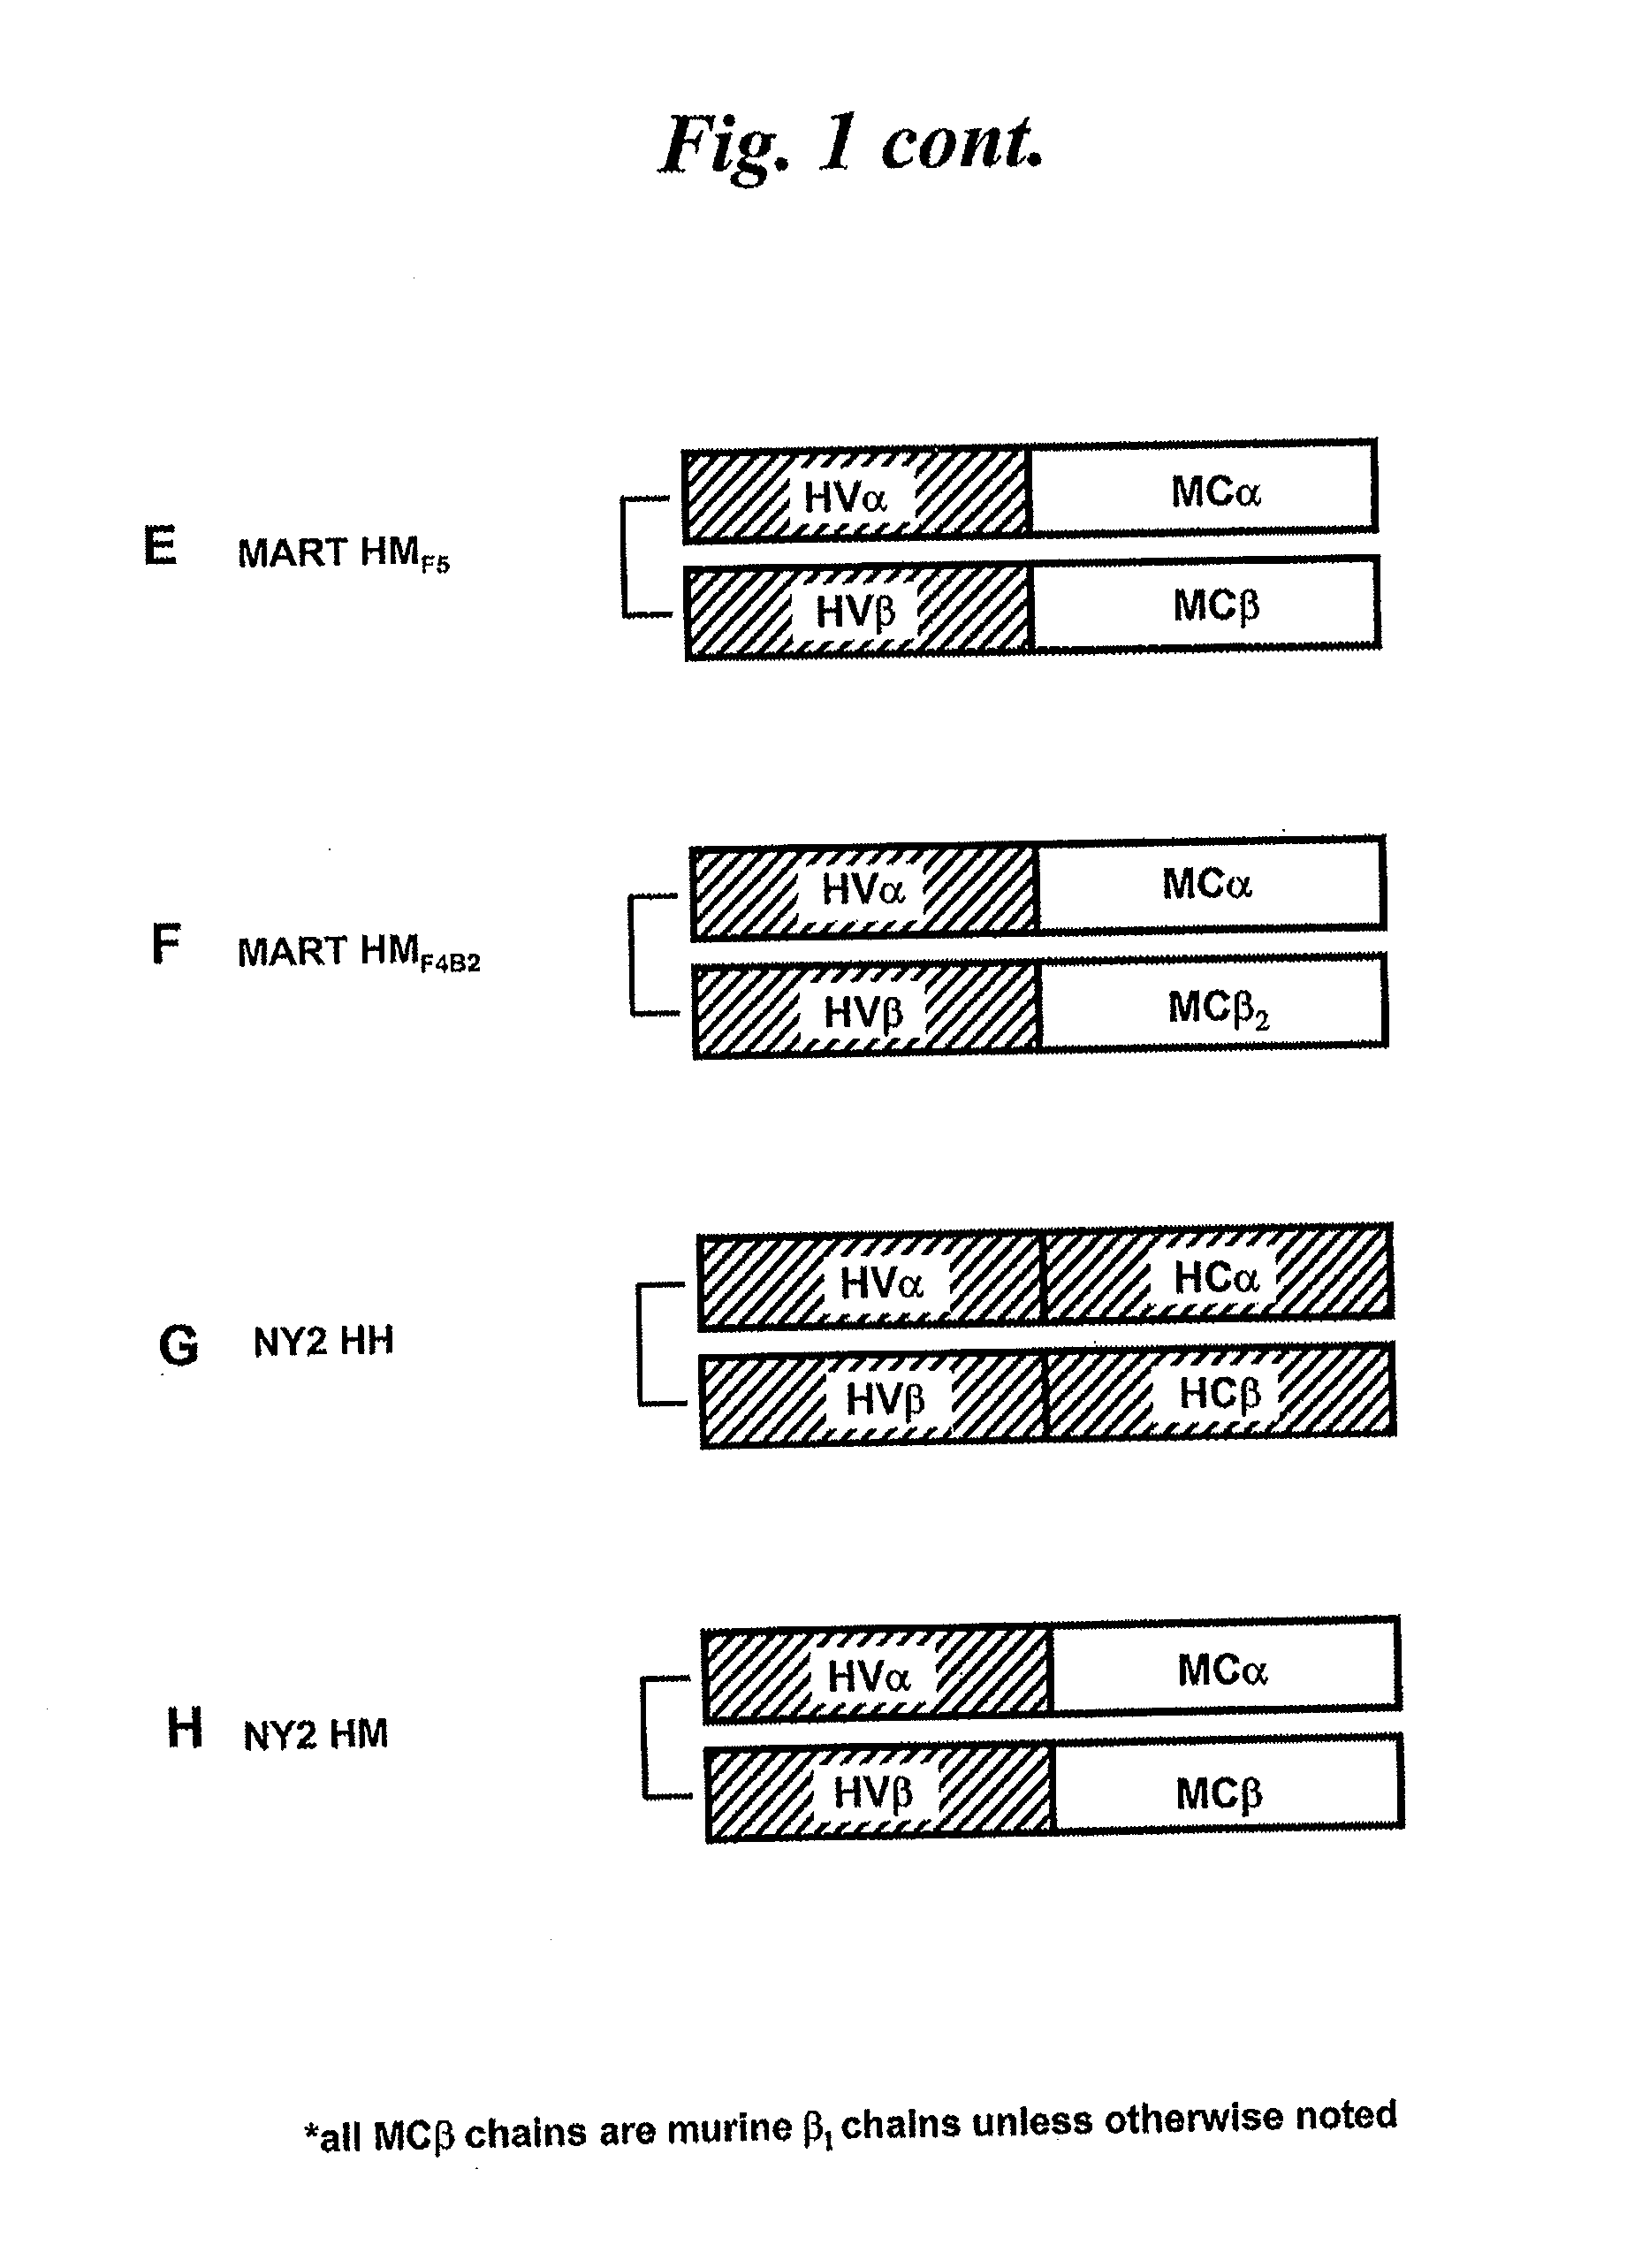 Anti-mart-1 t cell receptors and related materials and methods of use